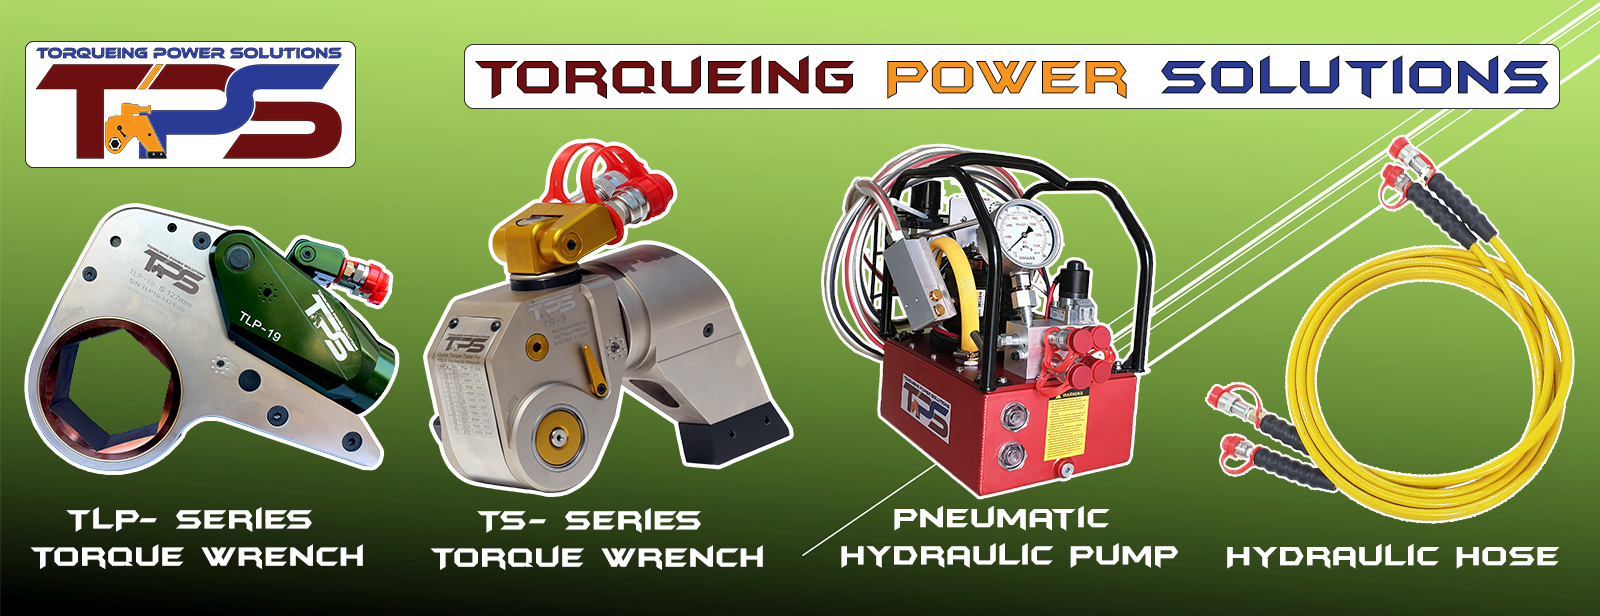 Torqueing Power Solutions